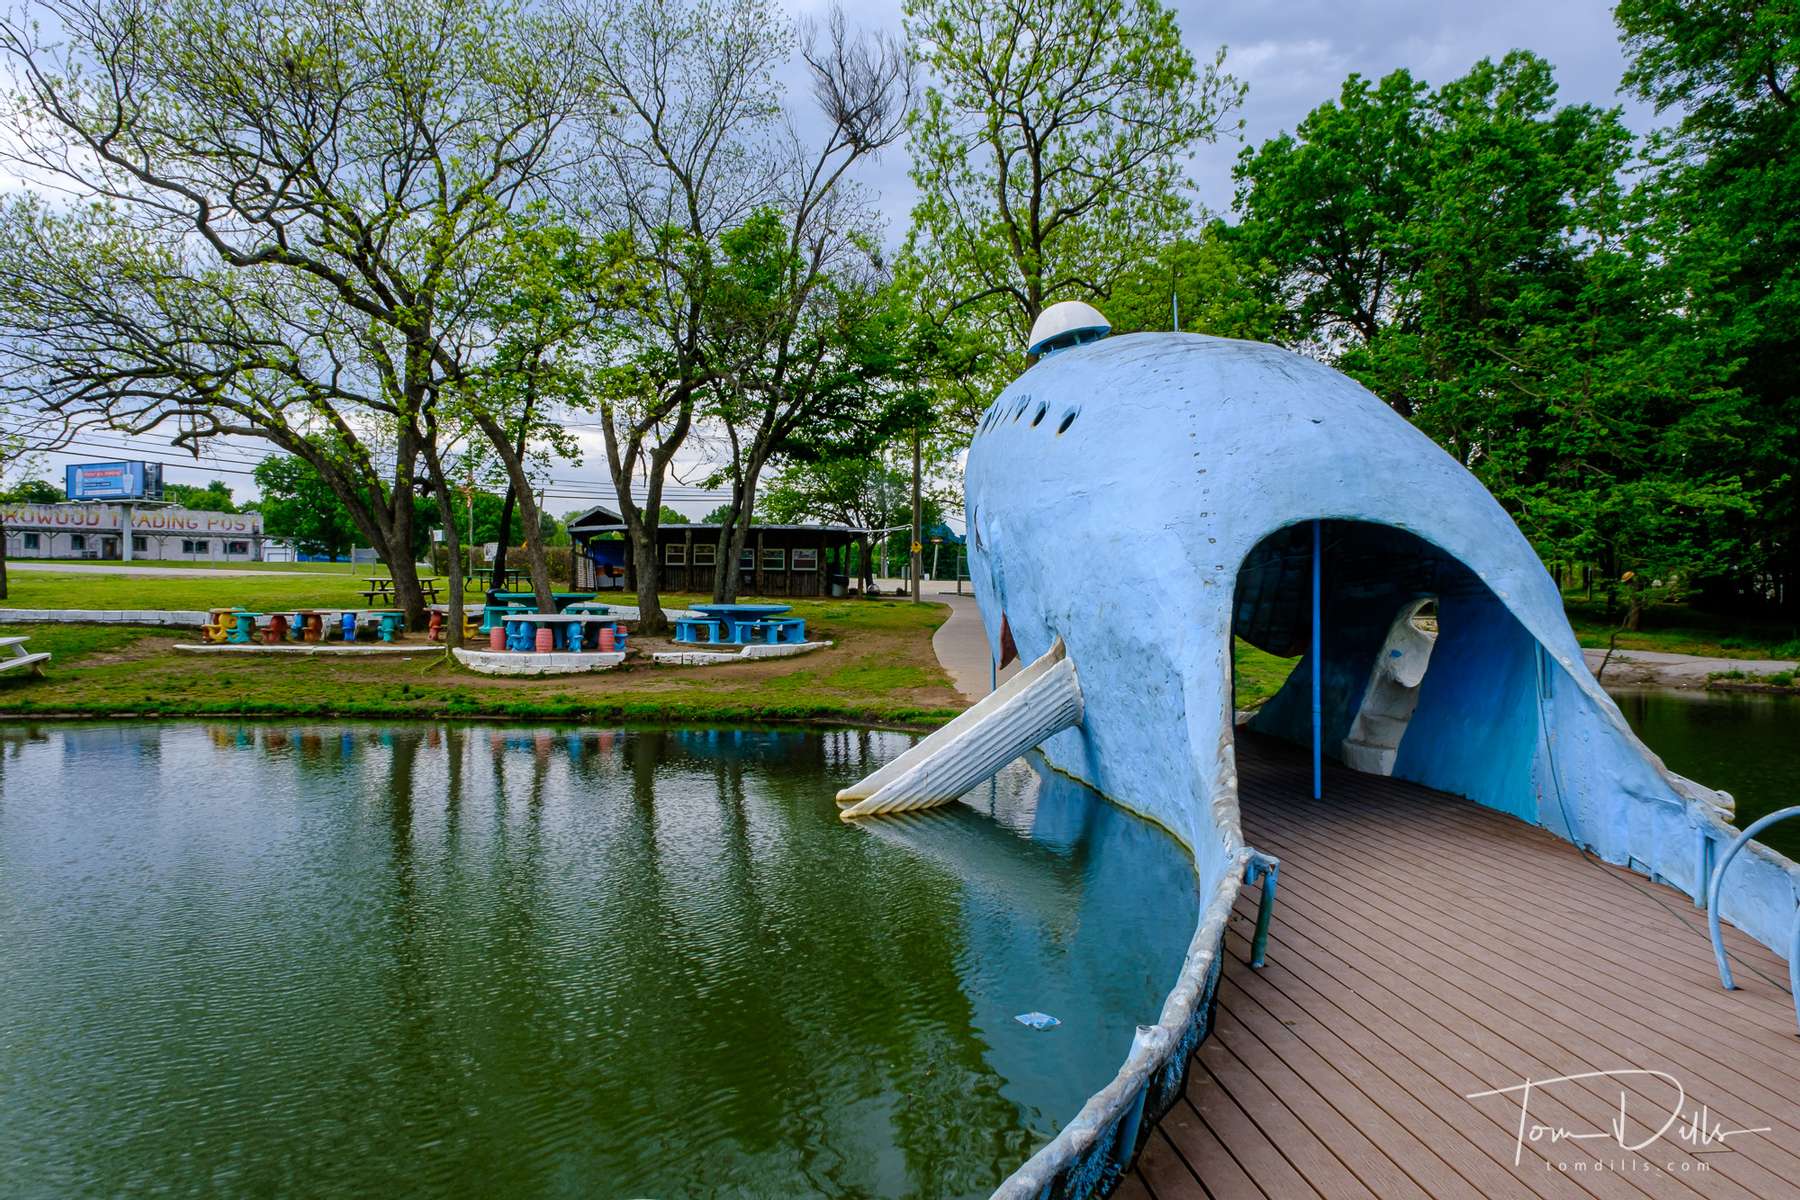 The Blue Whale of Catoosa, a Route 66 roadside attraction in Catoosa, Oklahoma